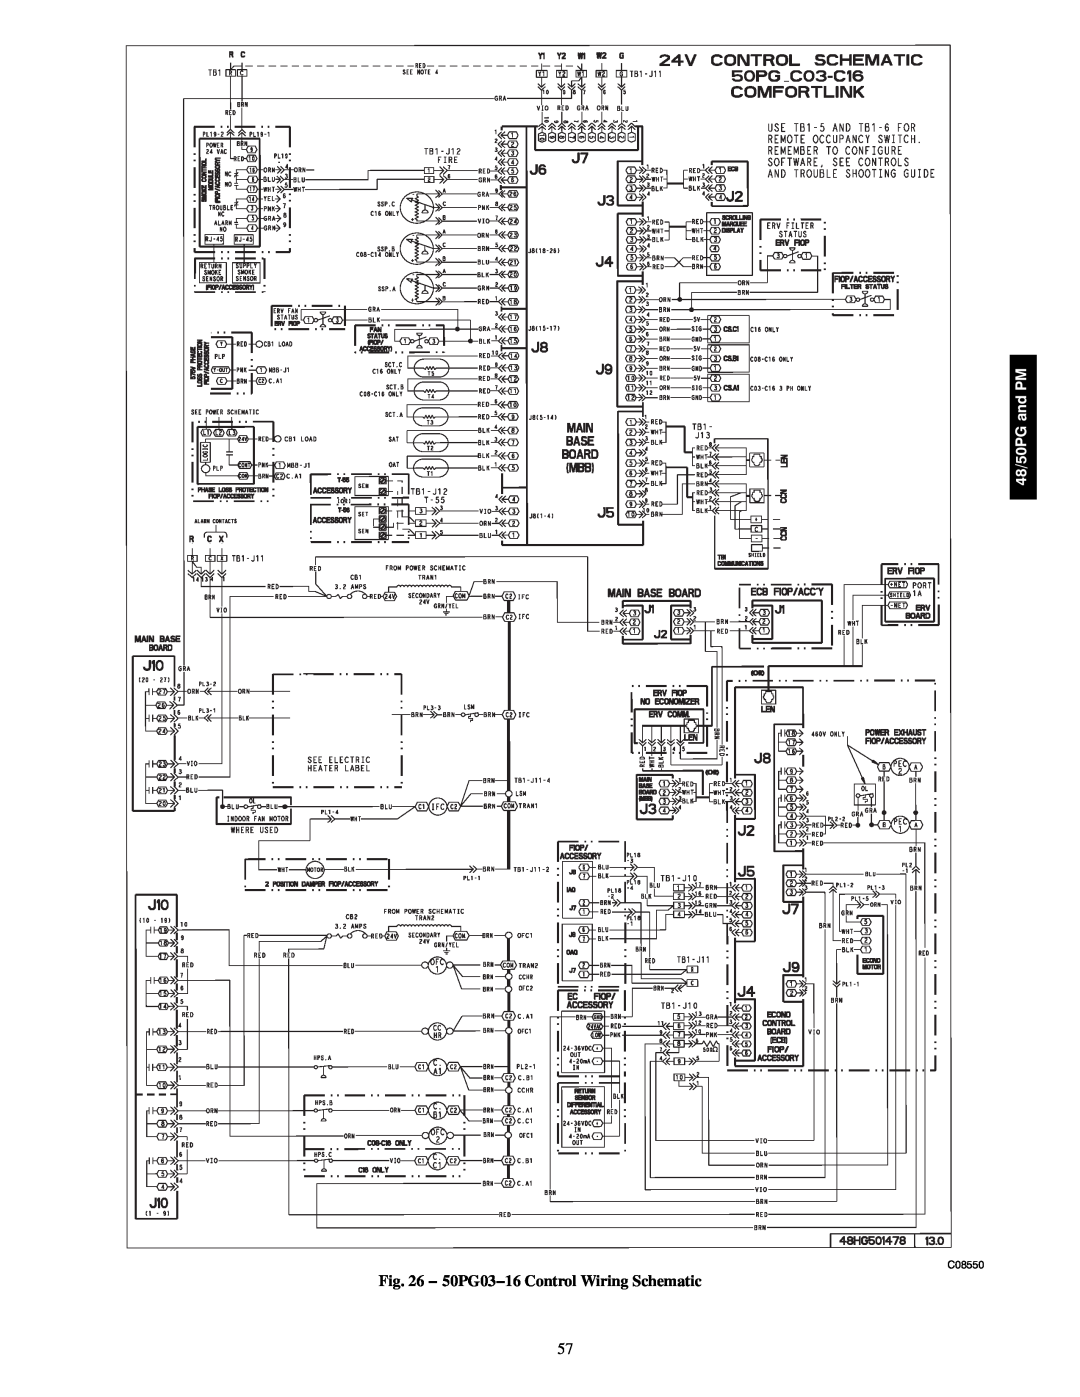 Carrier 48/50PM C16-28, 48/50PG C03-14 manual 50PG03−16 Control Wiring Schematic, 48/50PG and PM, C08550 